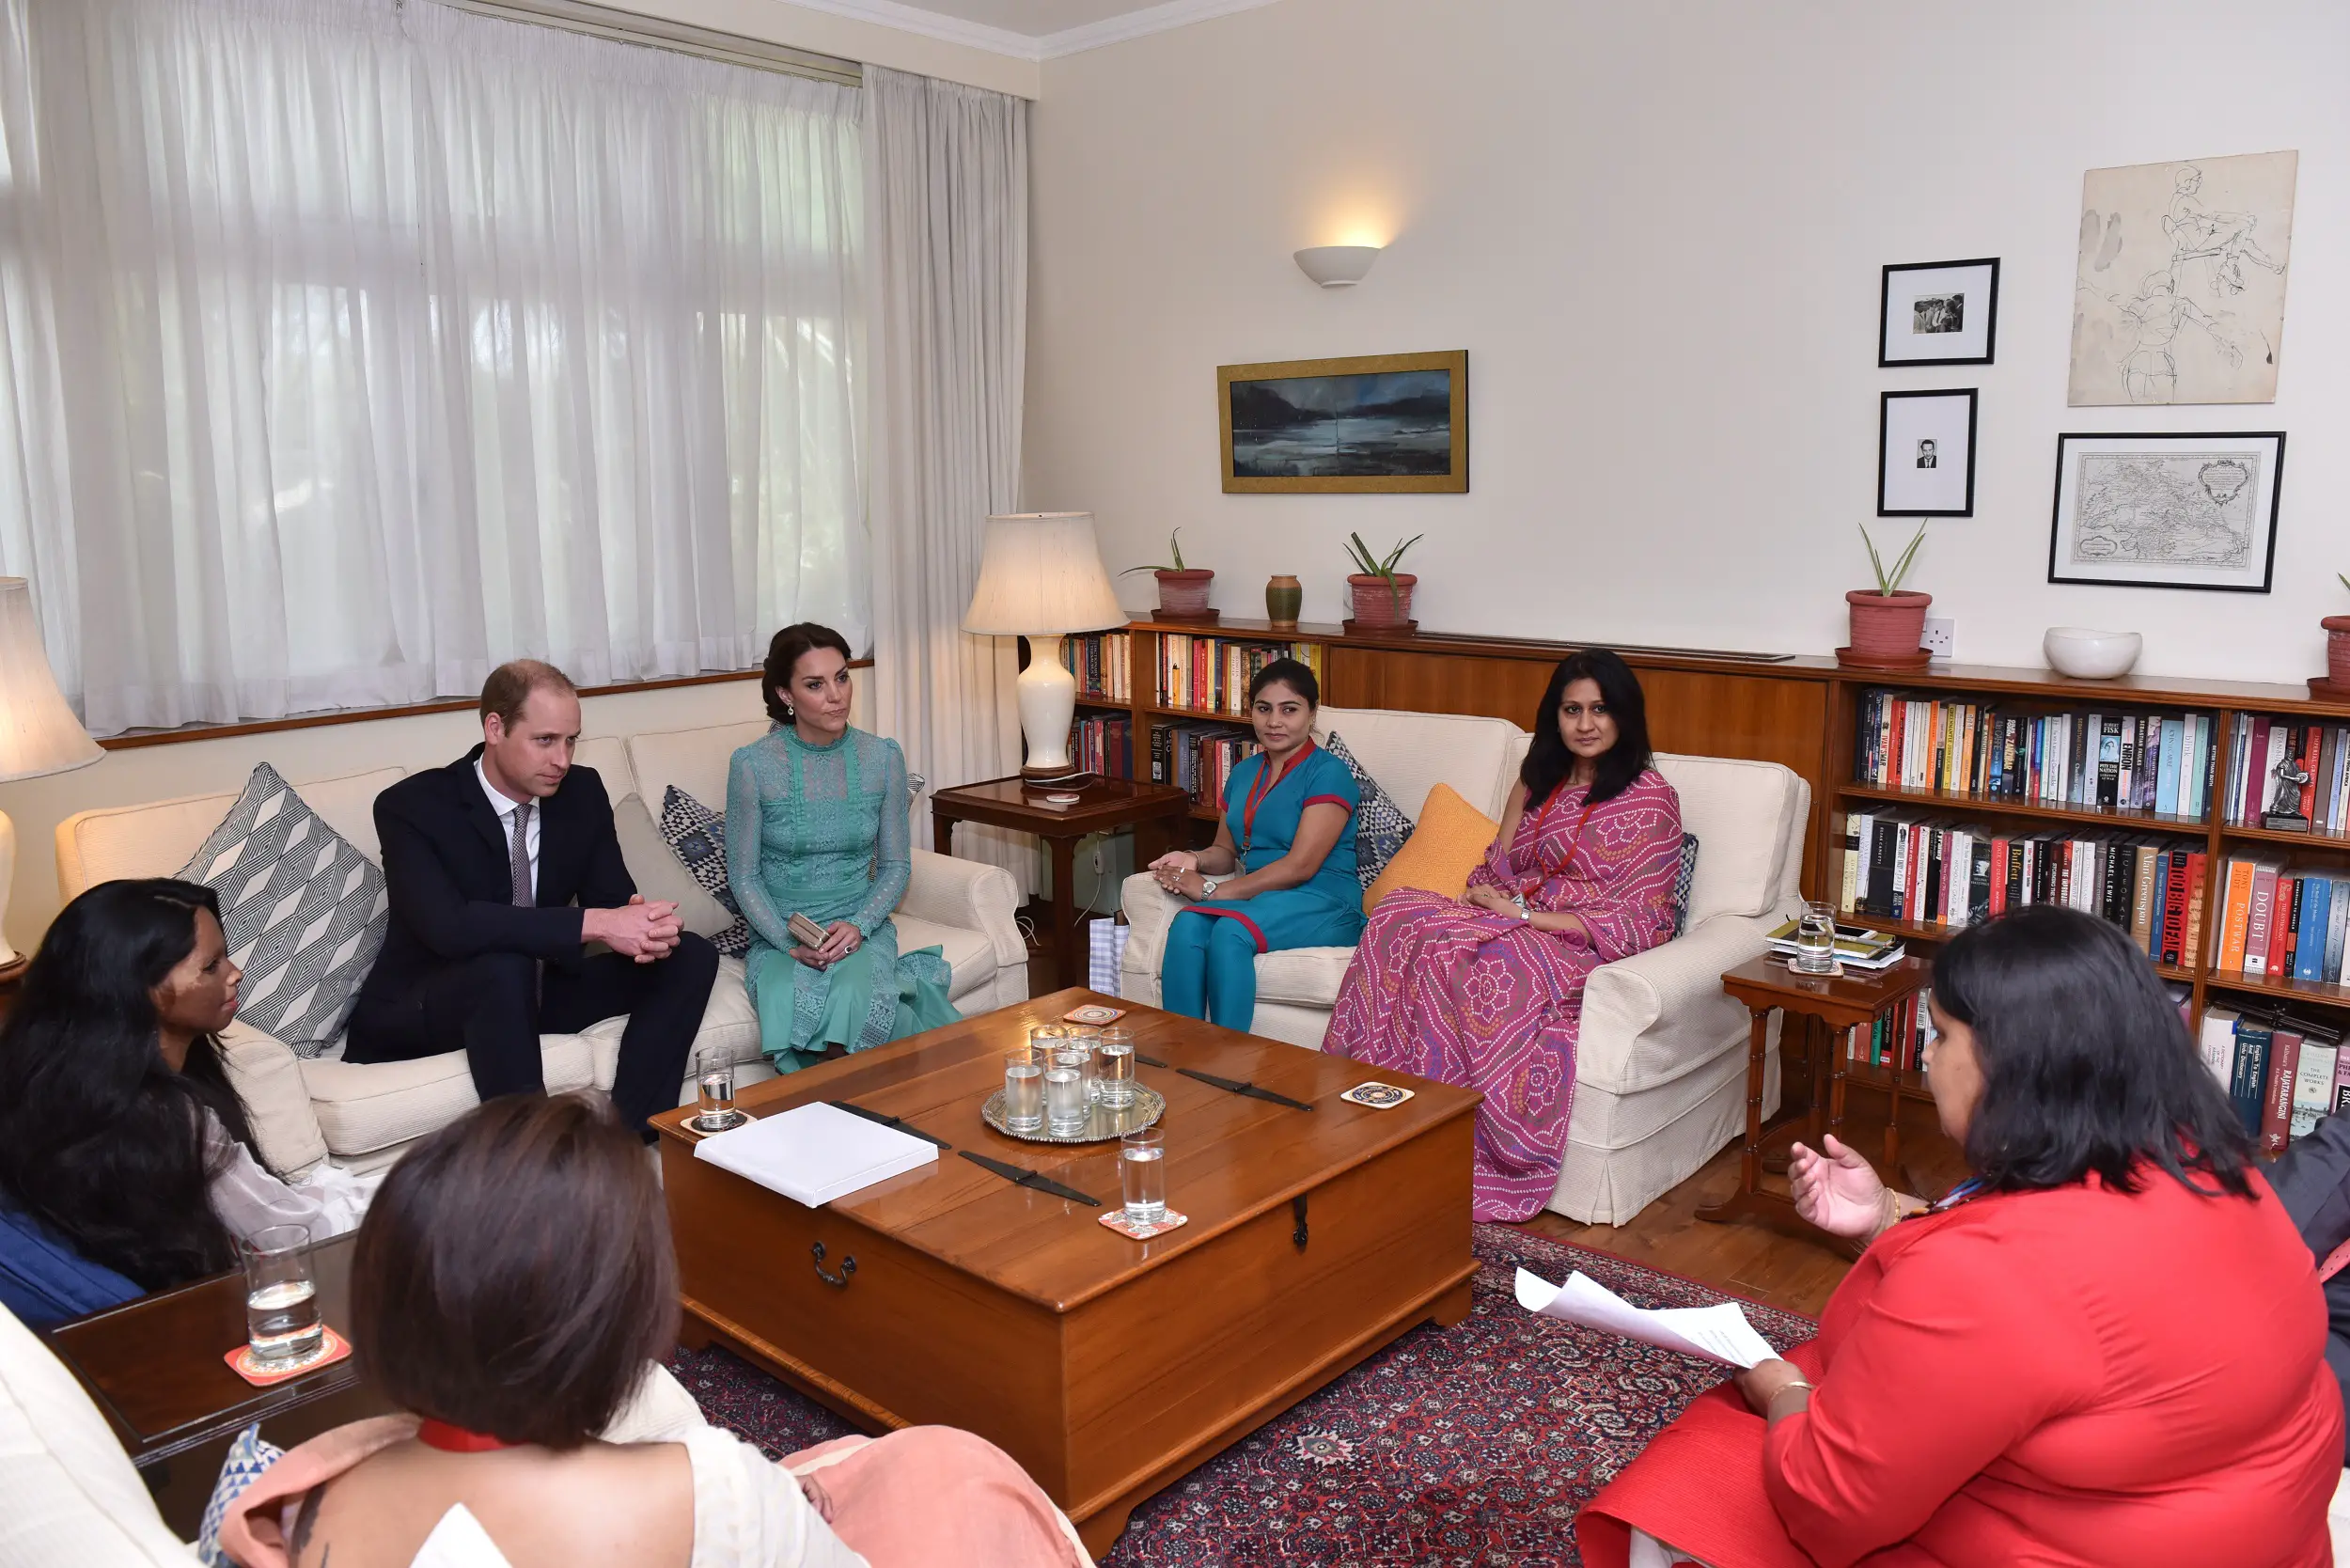 The meeting was convened at the personal request of The Duke who wanted an opportunity to hear directly from women working to support other women and girls